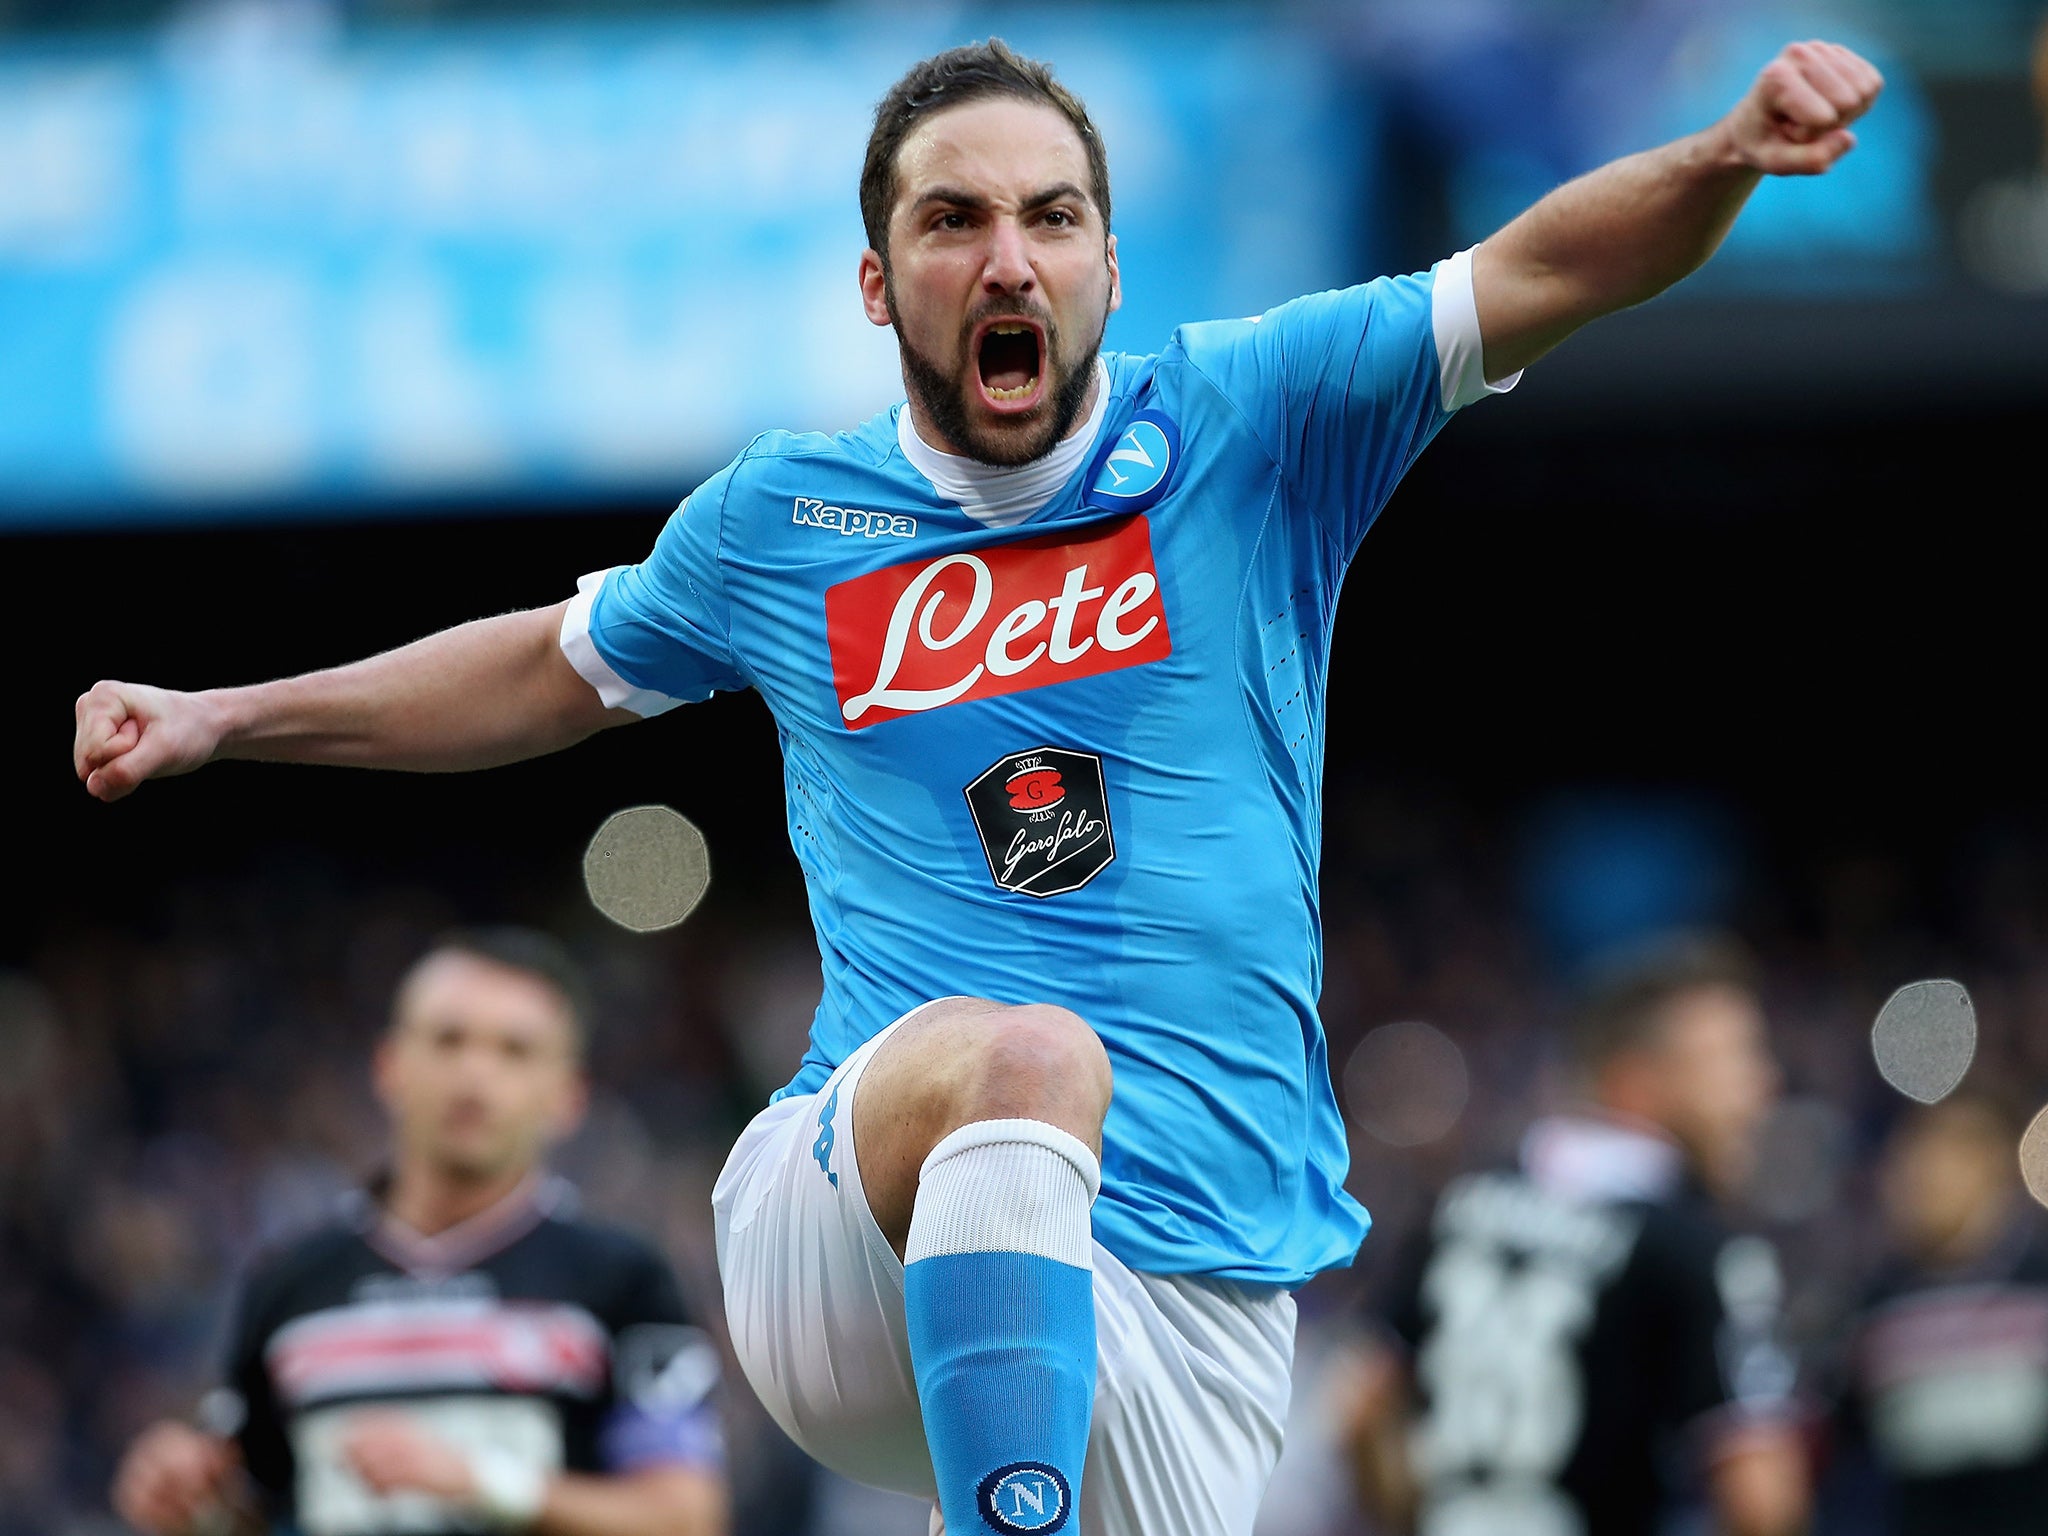 Higuain has enjoyed a record-breaking season with Napoli in Serie A